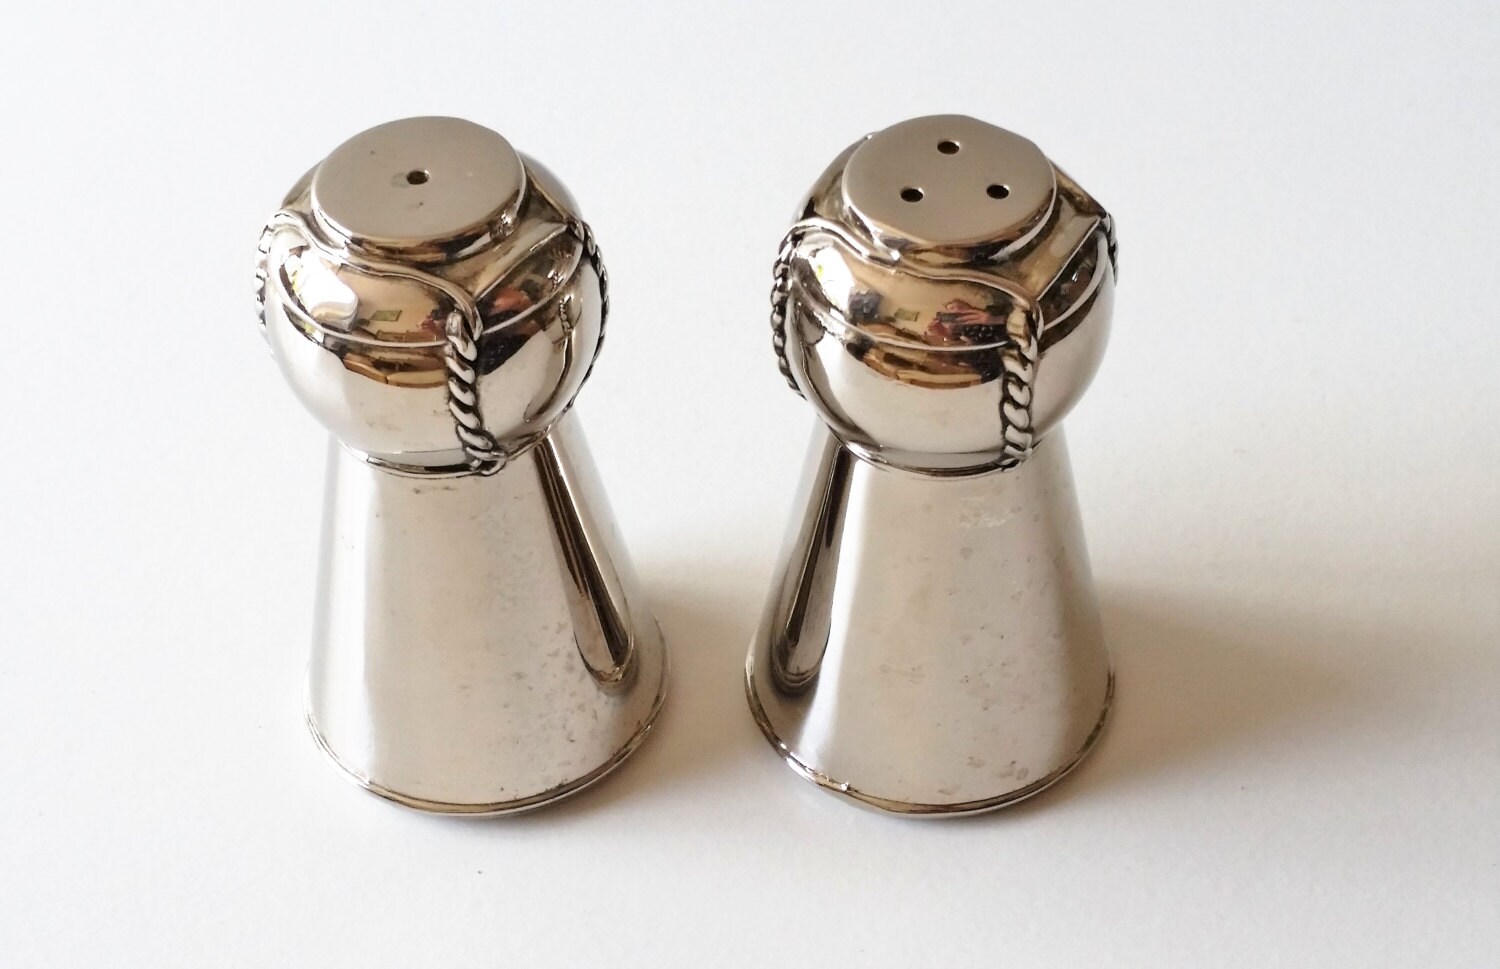 What Size Corks Are Used In Vintage Salt And Pepper Shakers?